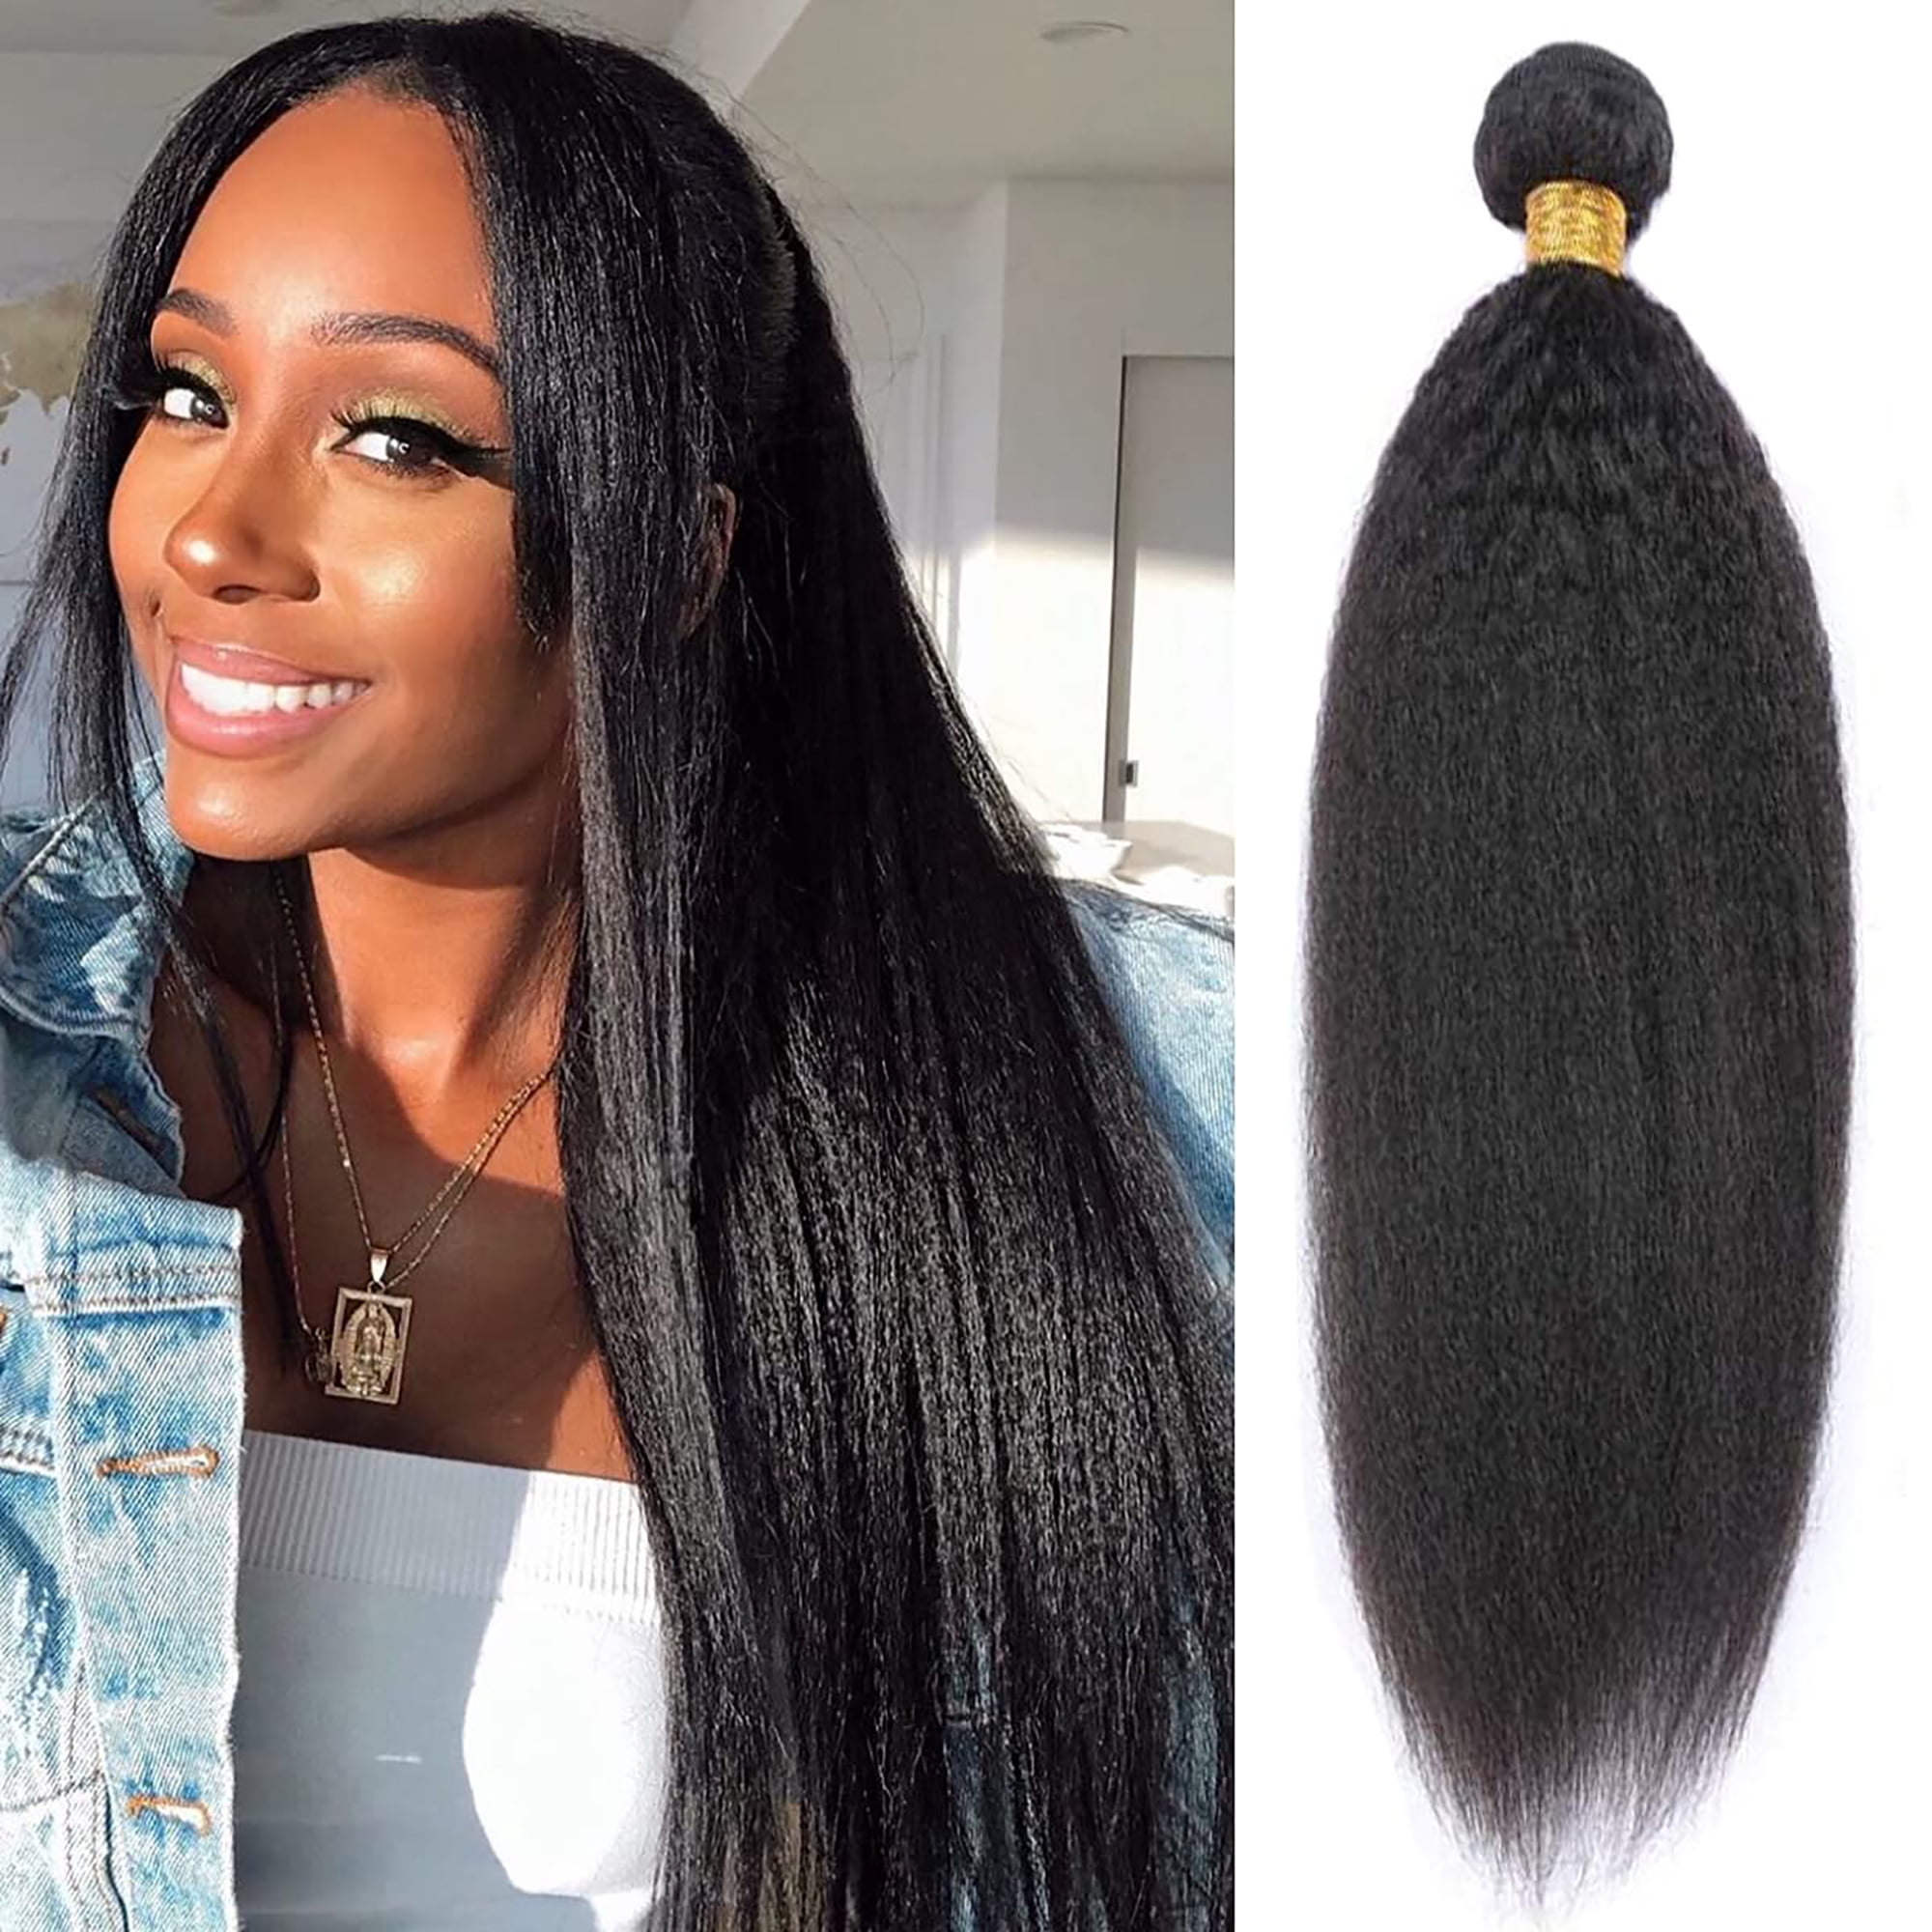 CLEARANCE Afro Kinky Straight Weave 4B 4C Clip In Virgin Human Hair  Extensions | eBay